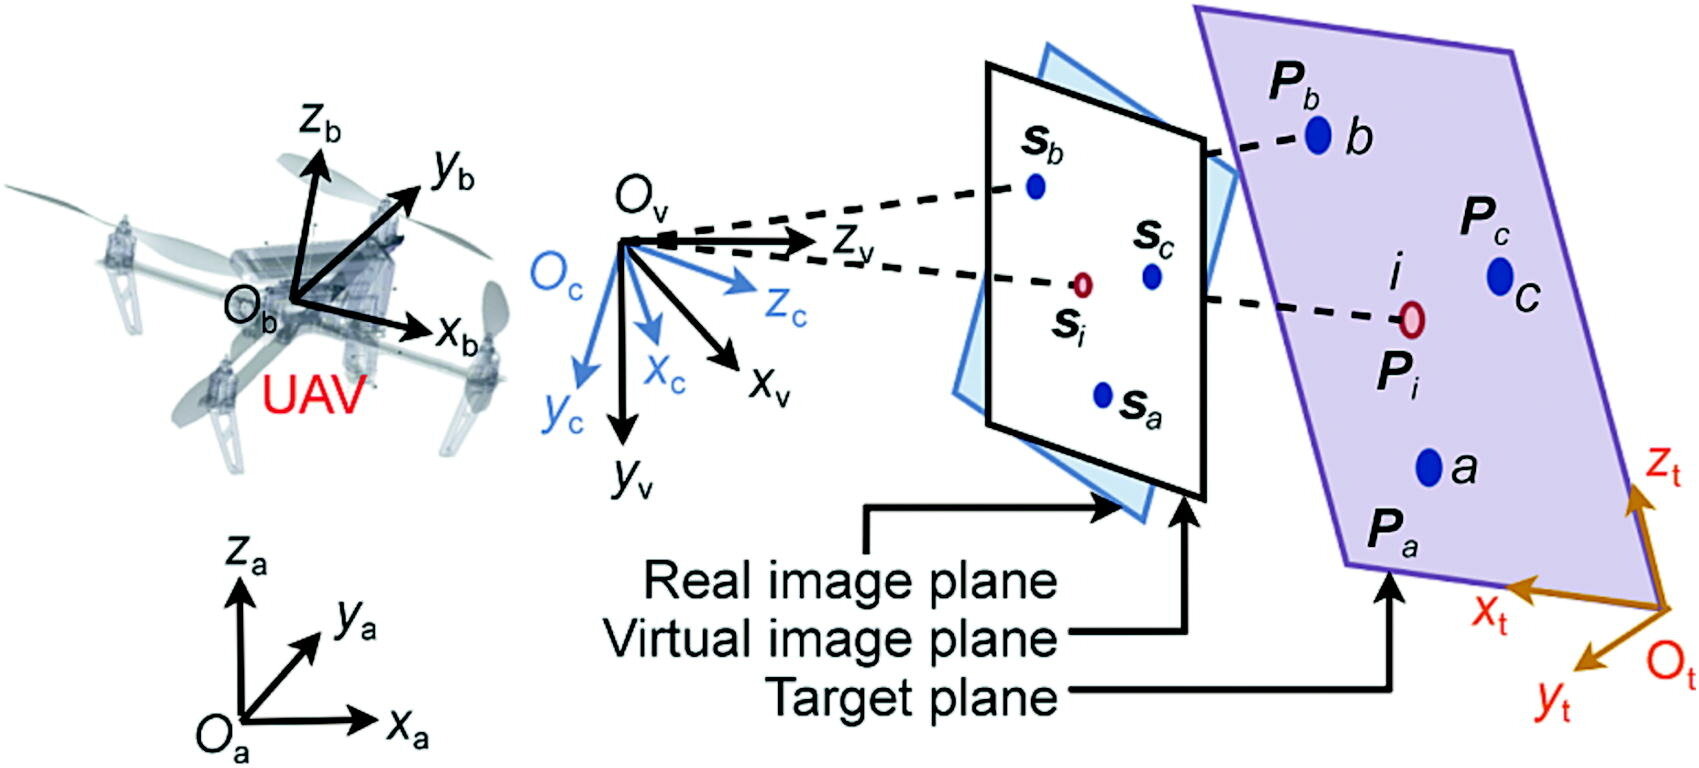 Cutting-edge UAV technology: New method for dynamic target tracking in GPS-denied environments